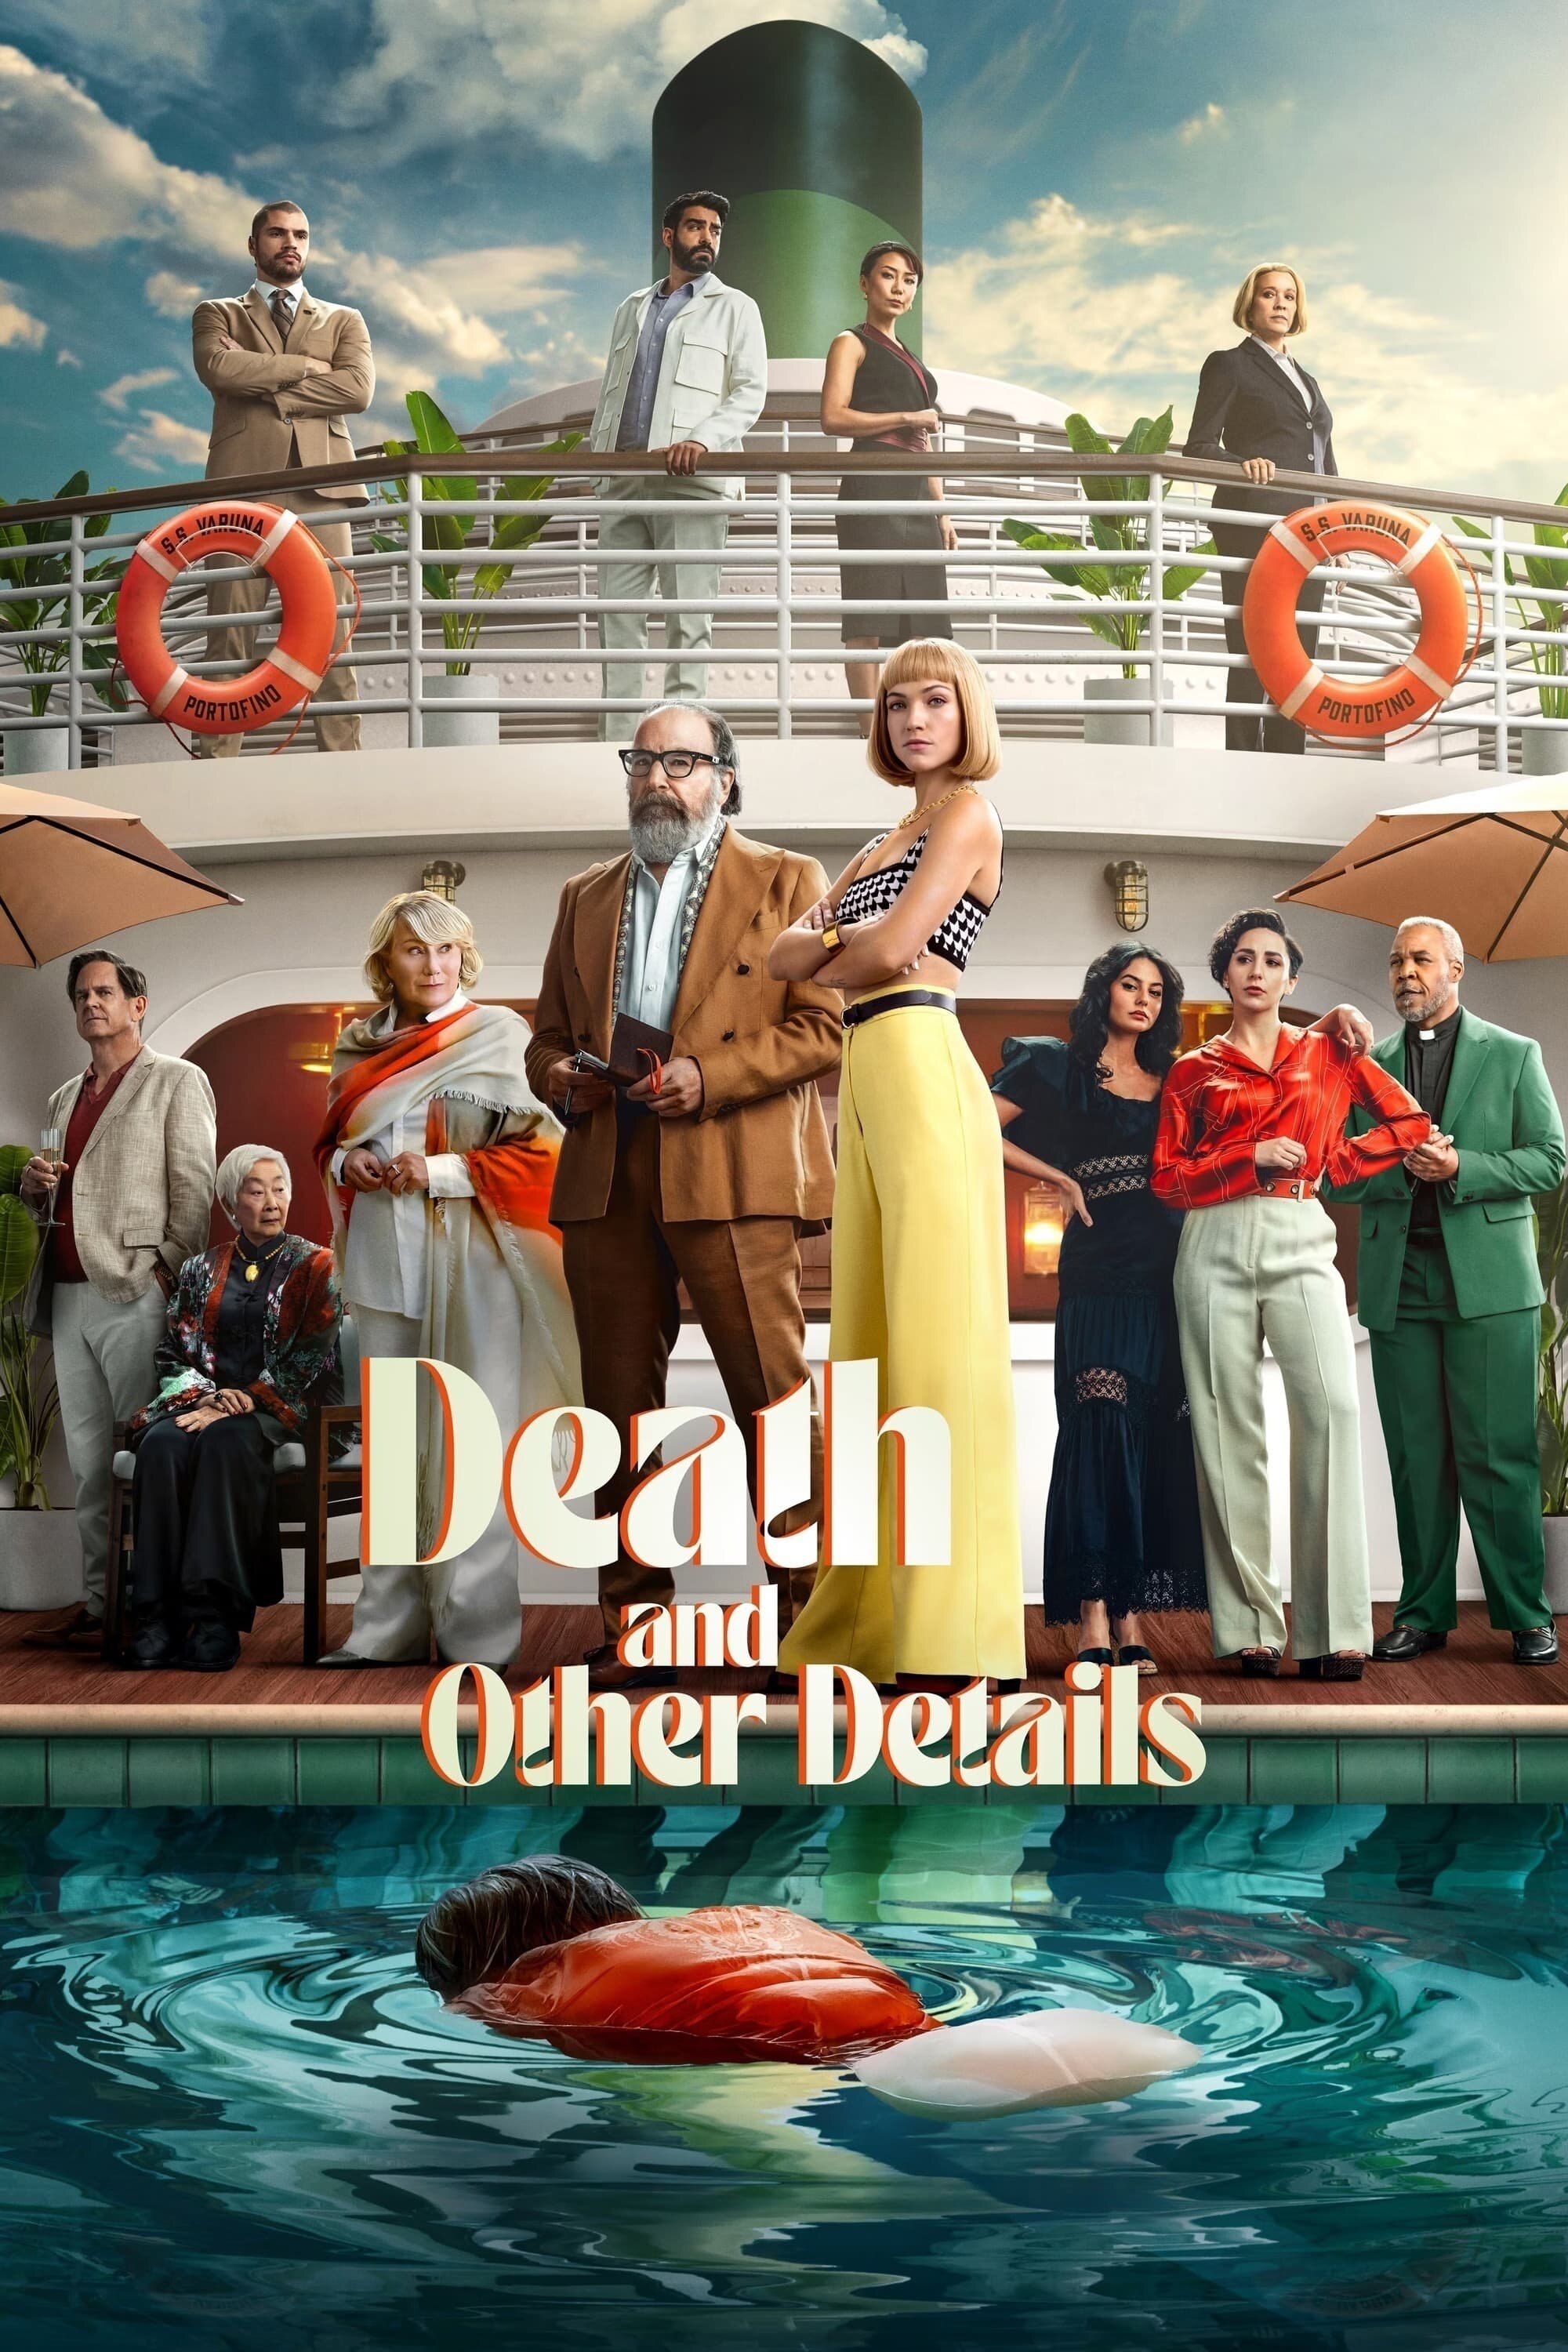 Death and Other Details S01E08 Vanishing 2160p HULU WEB-DL DD+5 1 H 265-playWEB